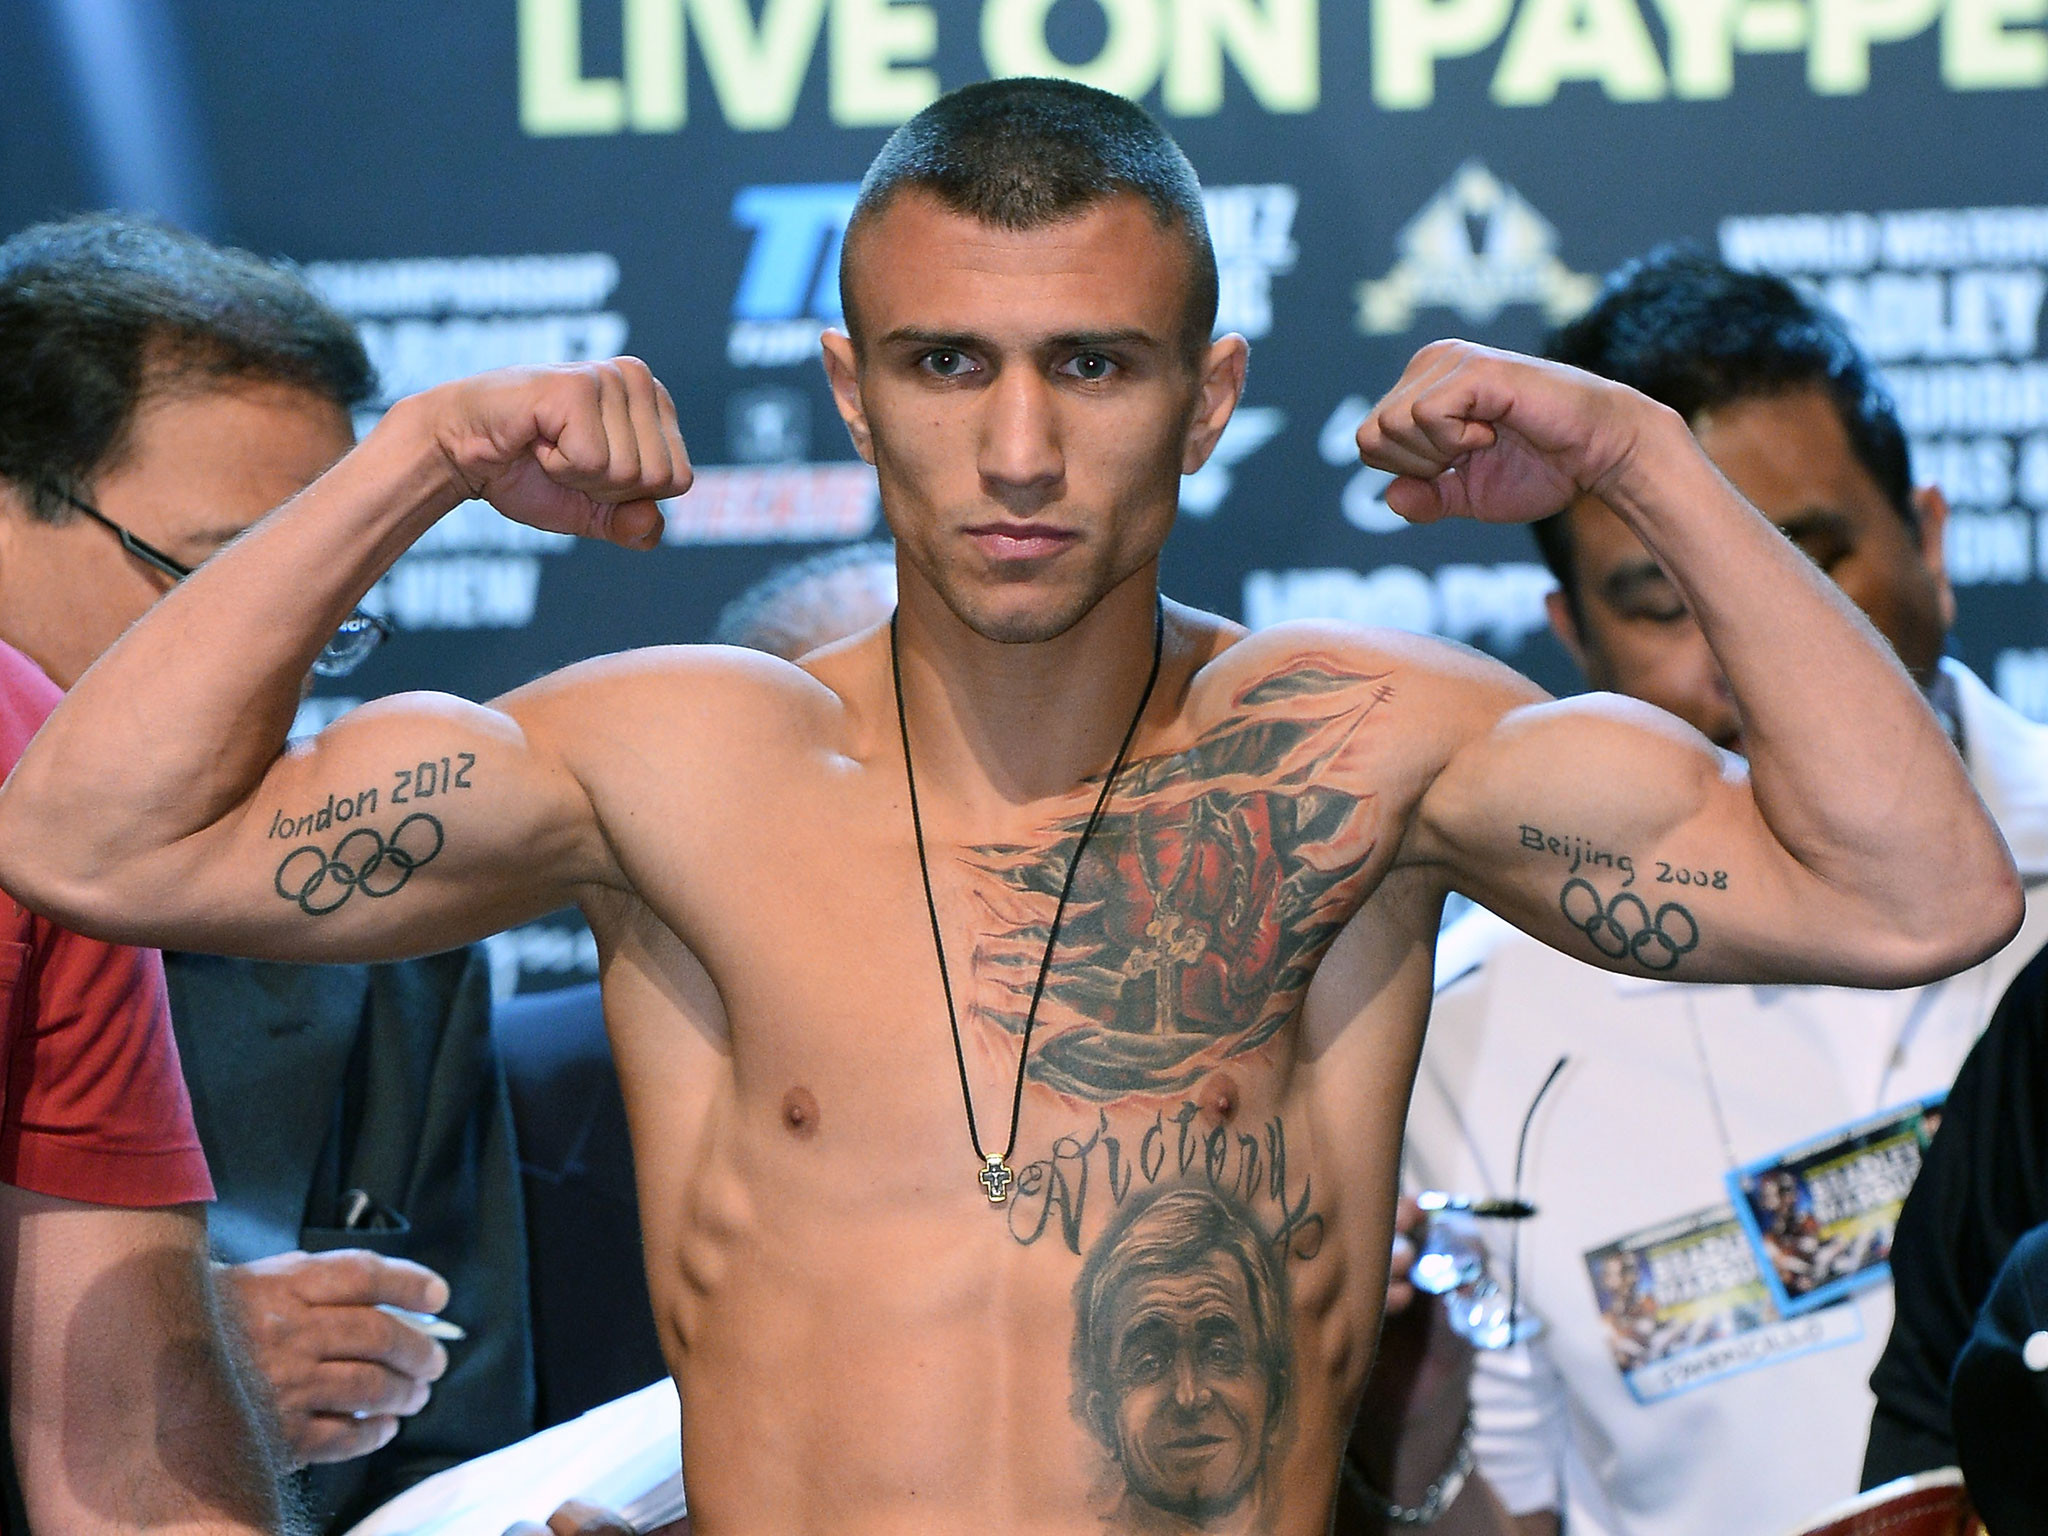 2048x1536 Floyd Mayweather vs Manny Pacquiao undercard: Who is Vasyl Lomachenko? |  The Independent